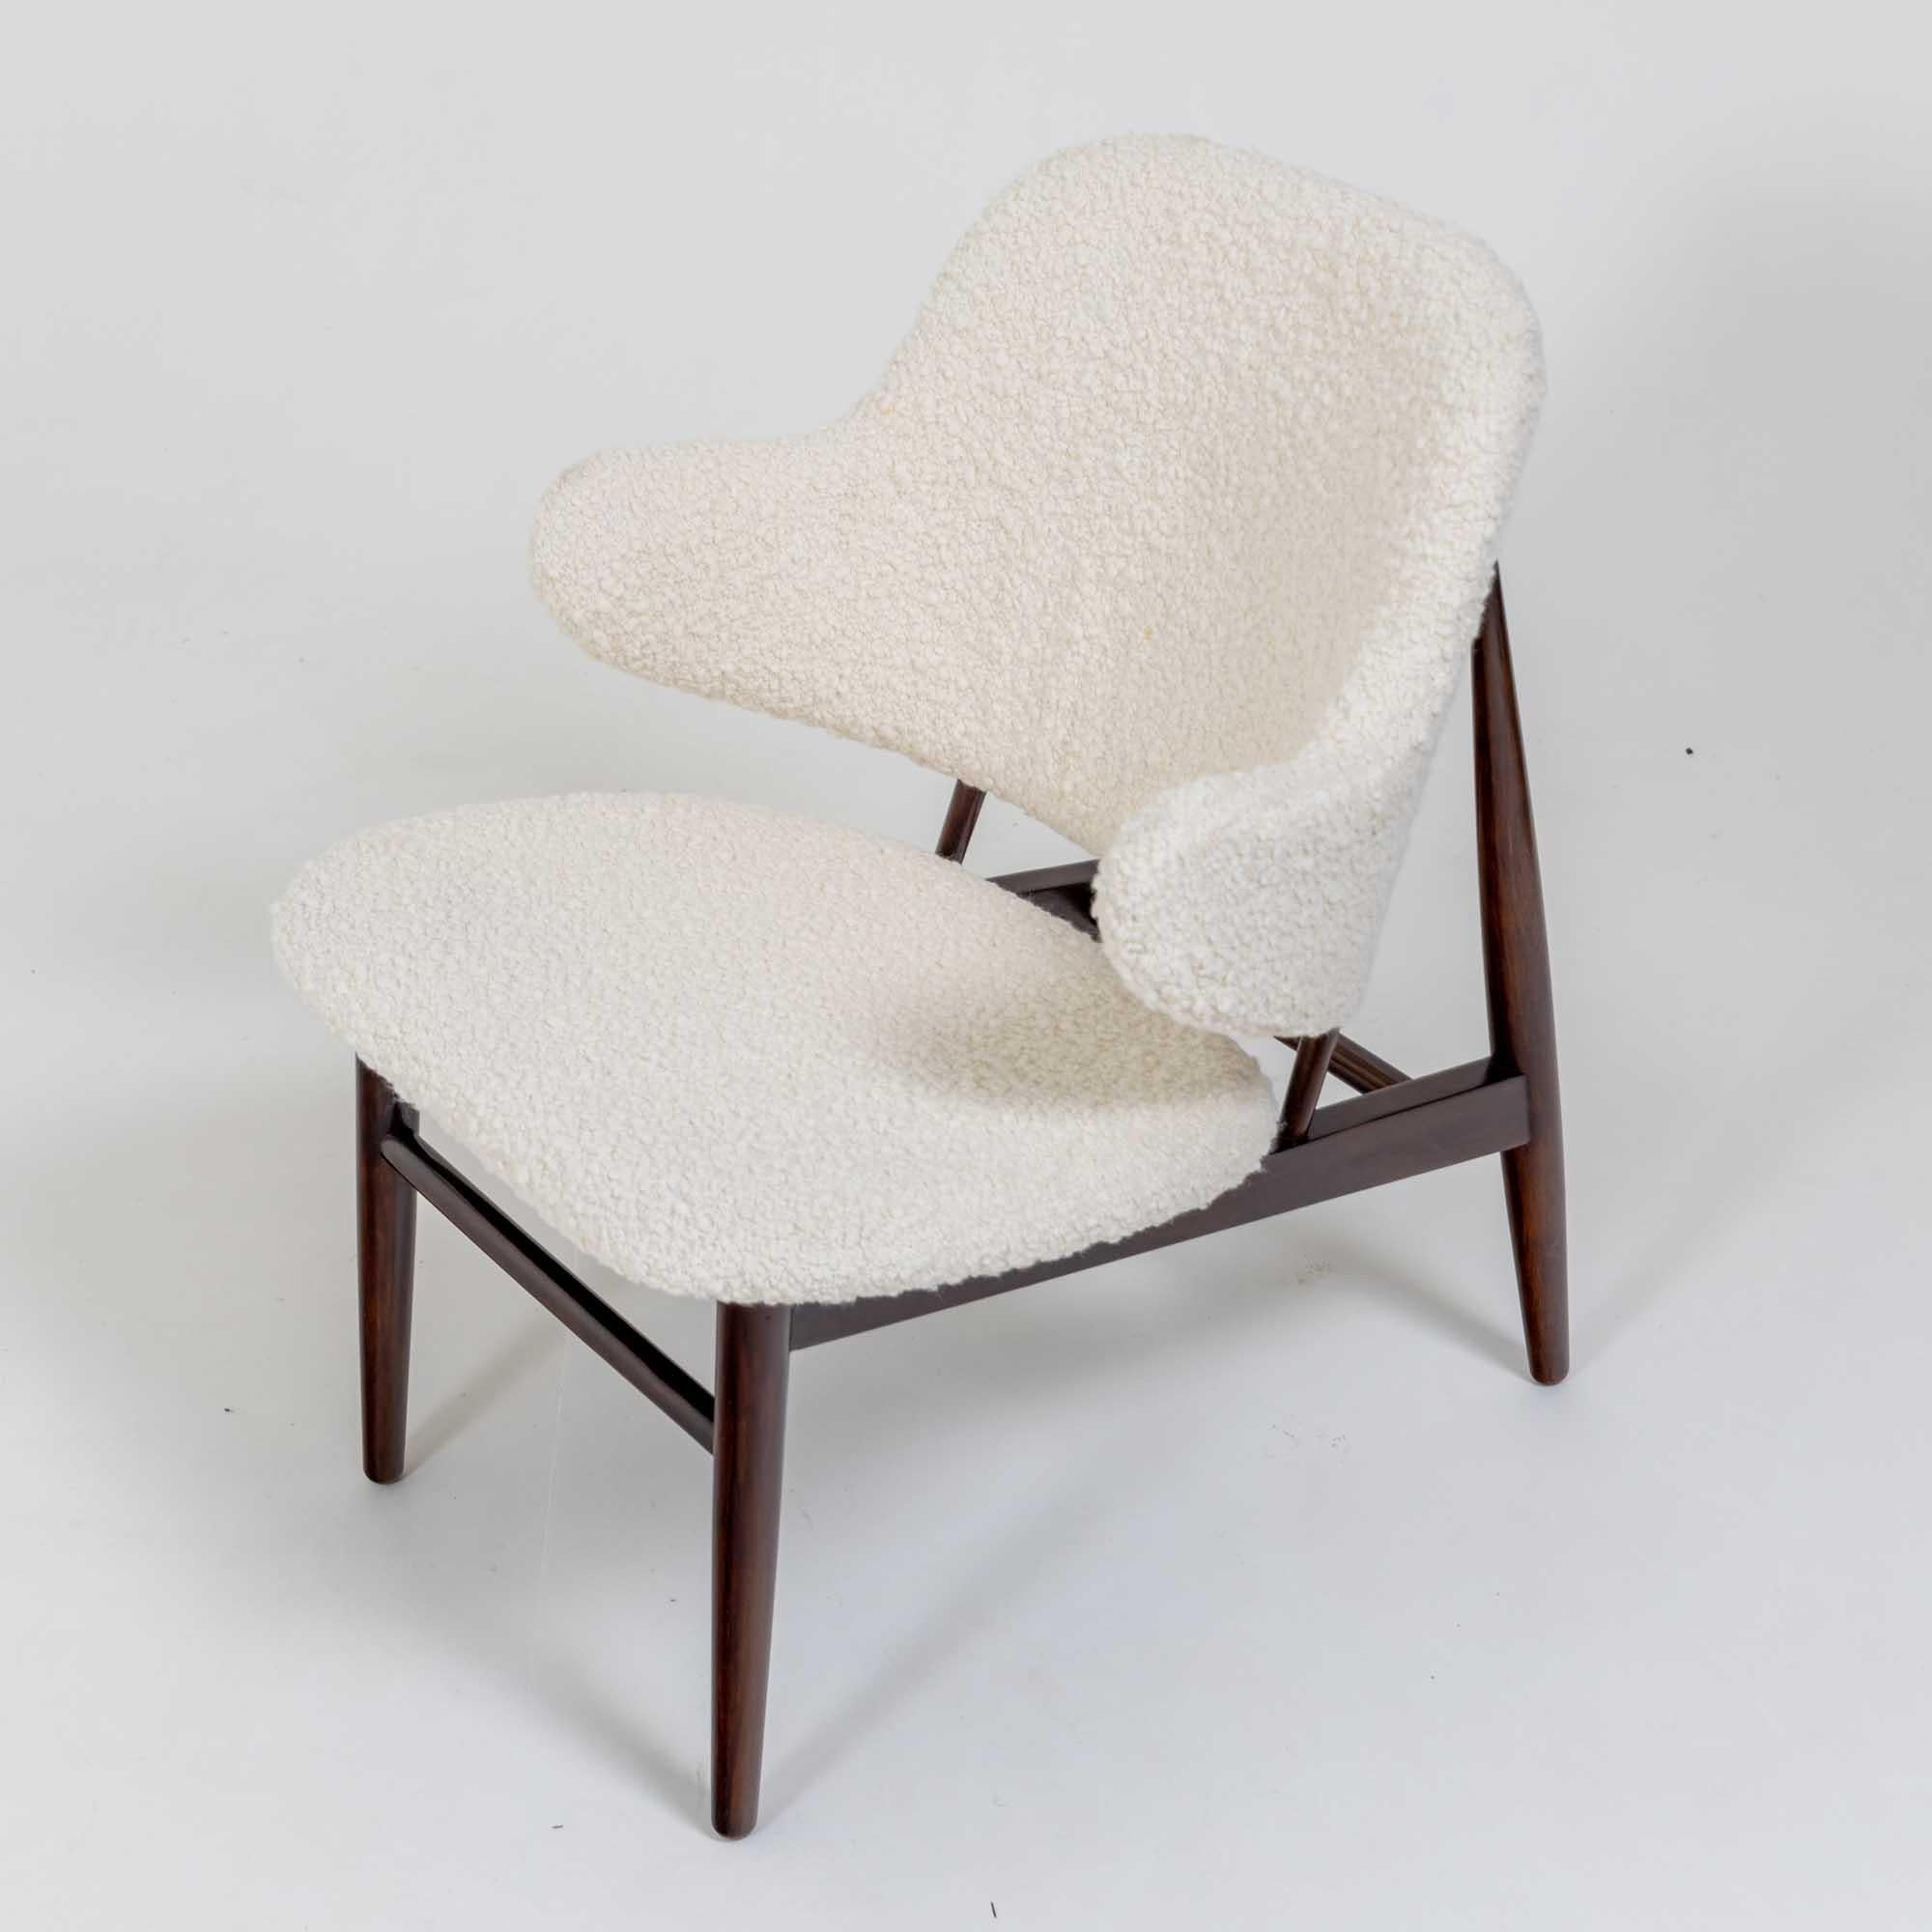 A decorative single Danish side chair on wooden base and legs. 
Upholstered in boucle fabric.